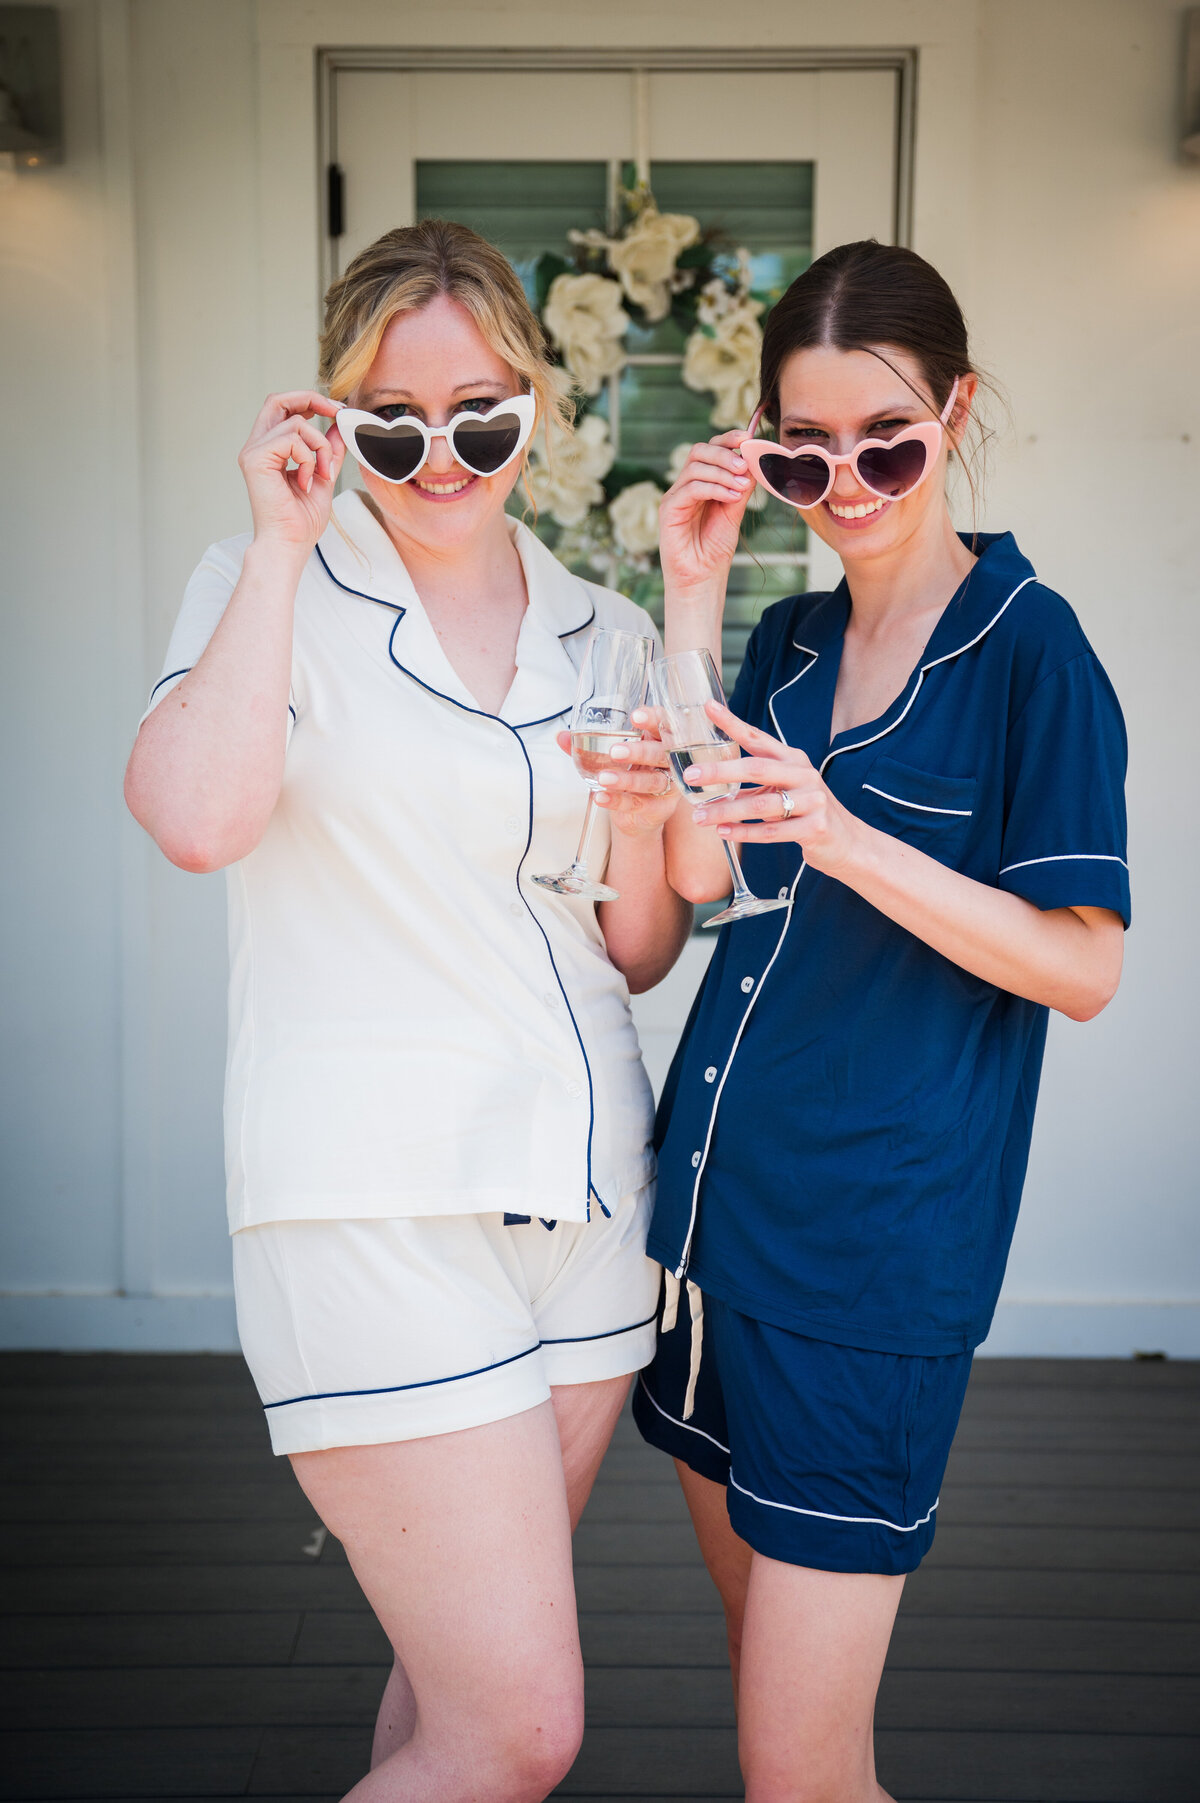 A bride and bridesmaid wearing pajamas pose with their heart sunglasses at The Barn at Raccoon Creek in Denver, Colorado.